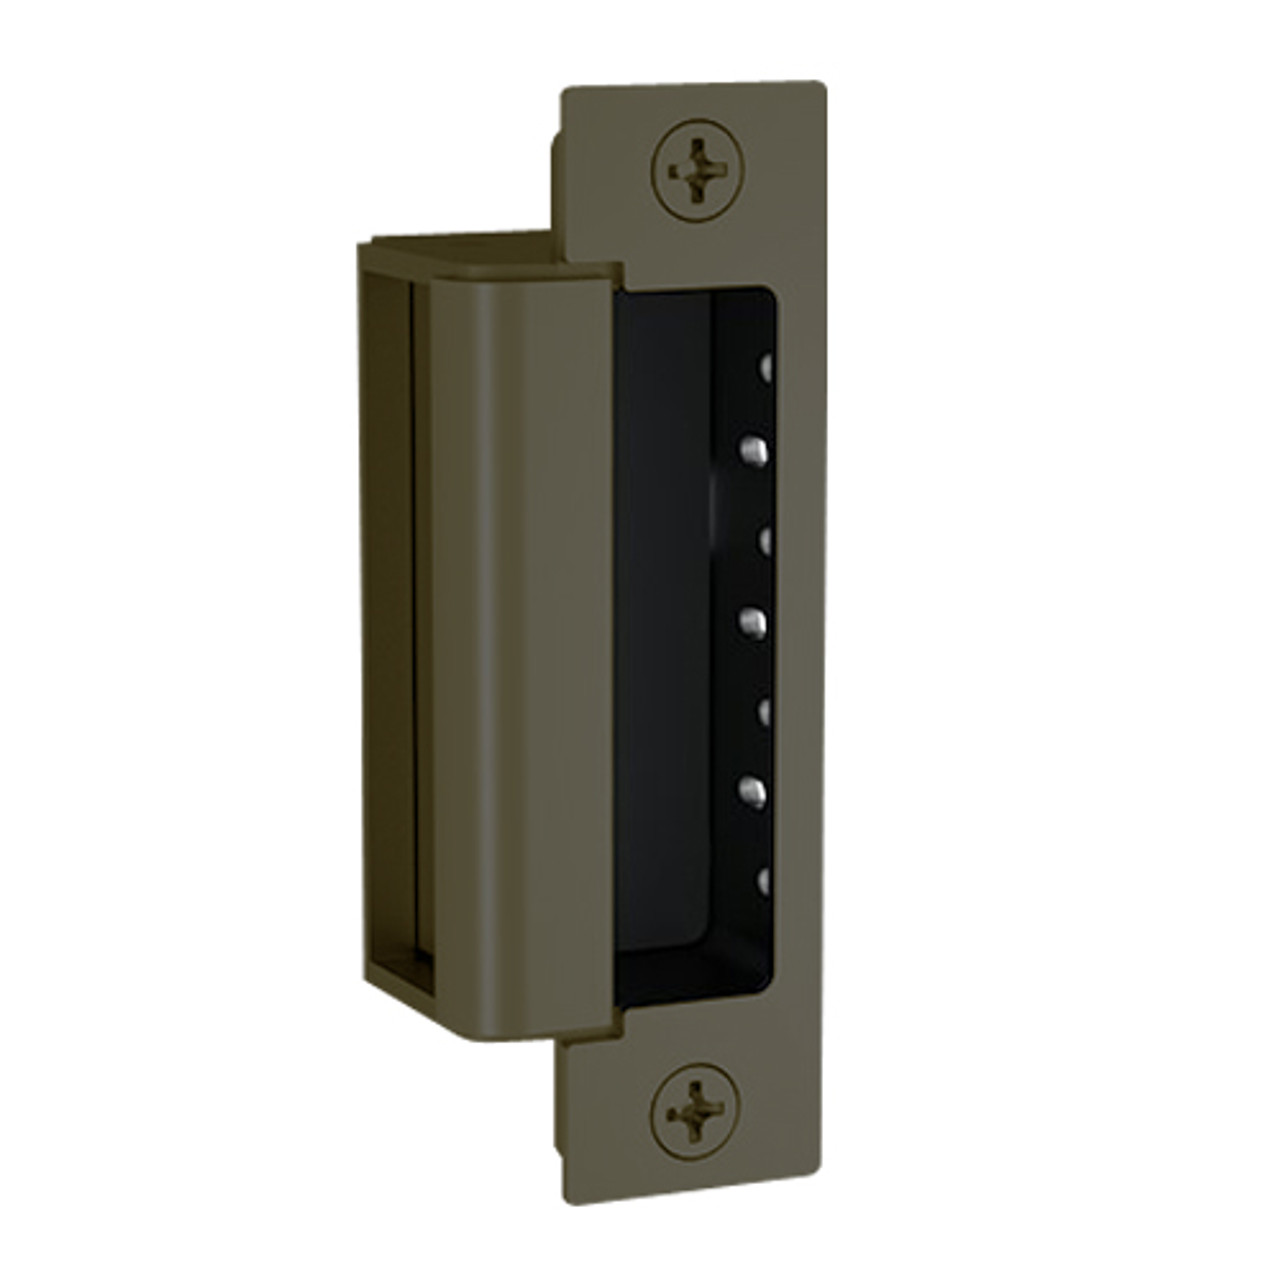 1600-CLB-DLM-613E Hes 1600 Series Dynamic Low Profile Electric Strike for Latchbolt Lock with Dual Lock Monitor in Dark Oxidized Satin Bronze